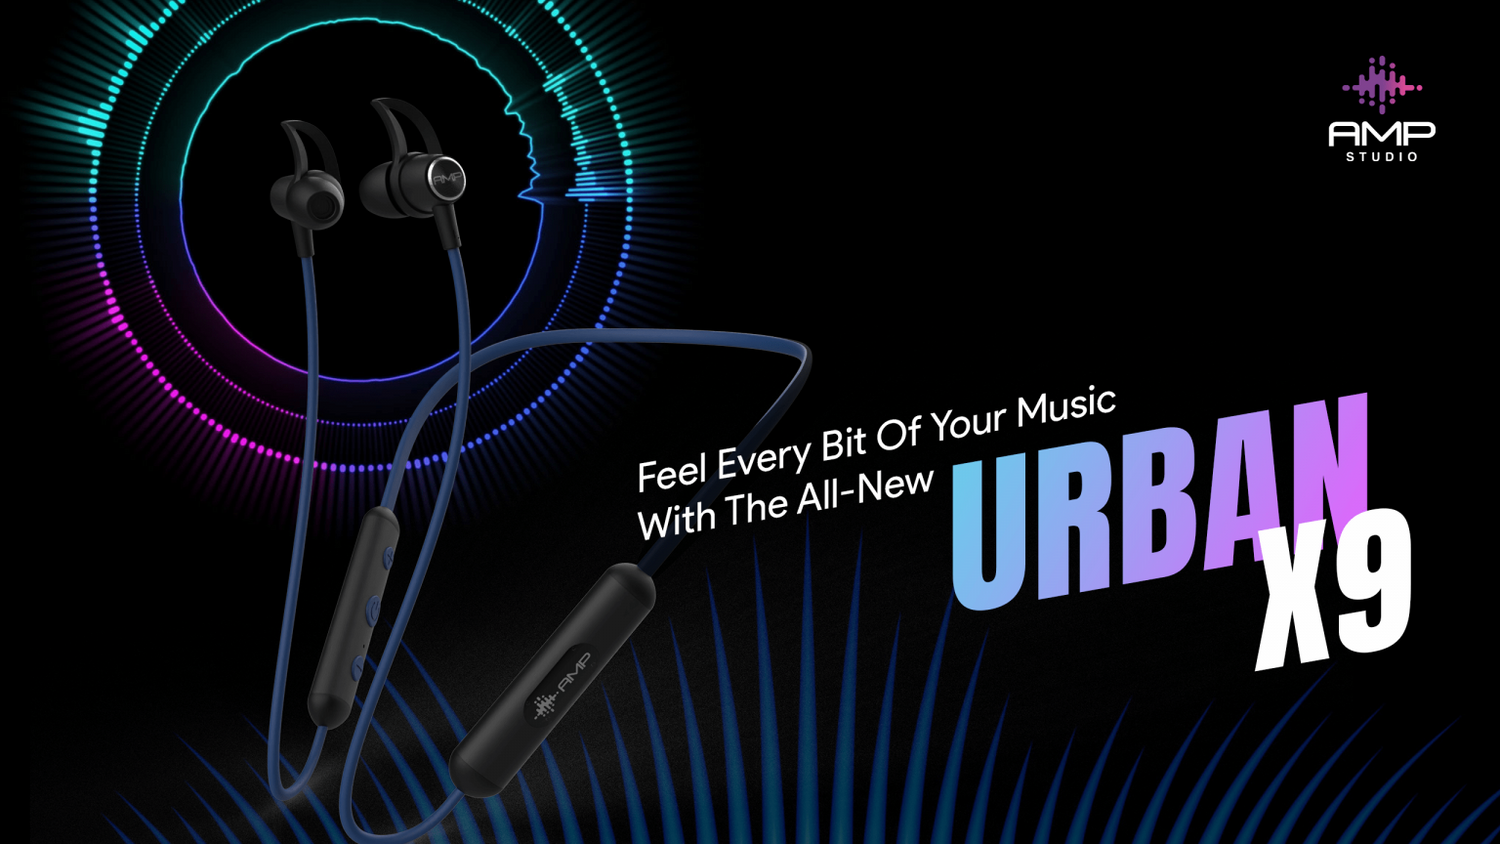 Feel Every Bit Of Your Music With The All-New AMP Urban X9 Bluetooth Earphones